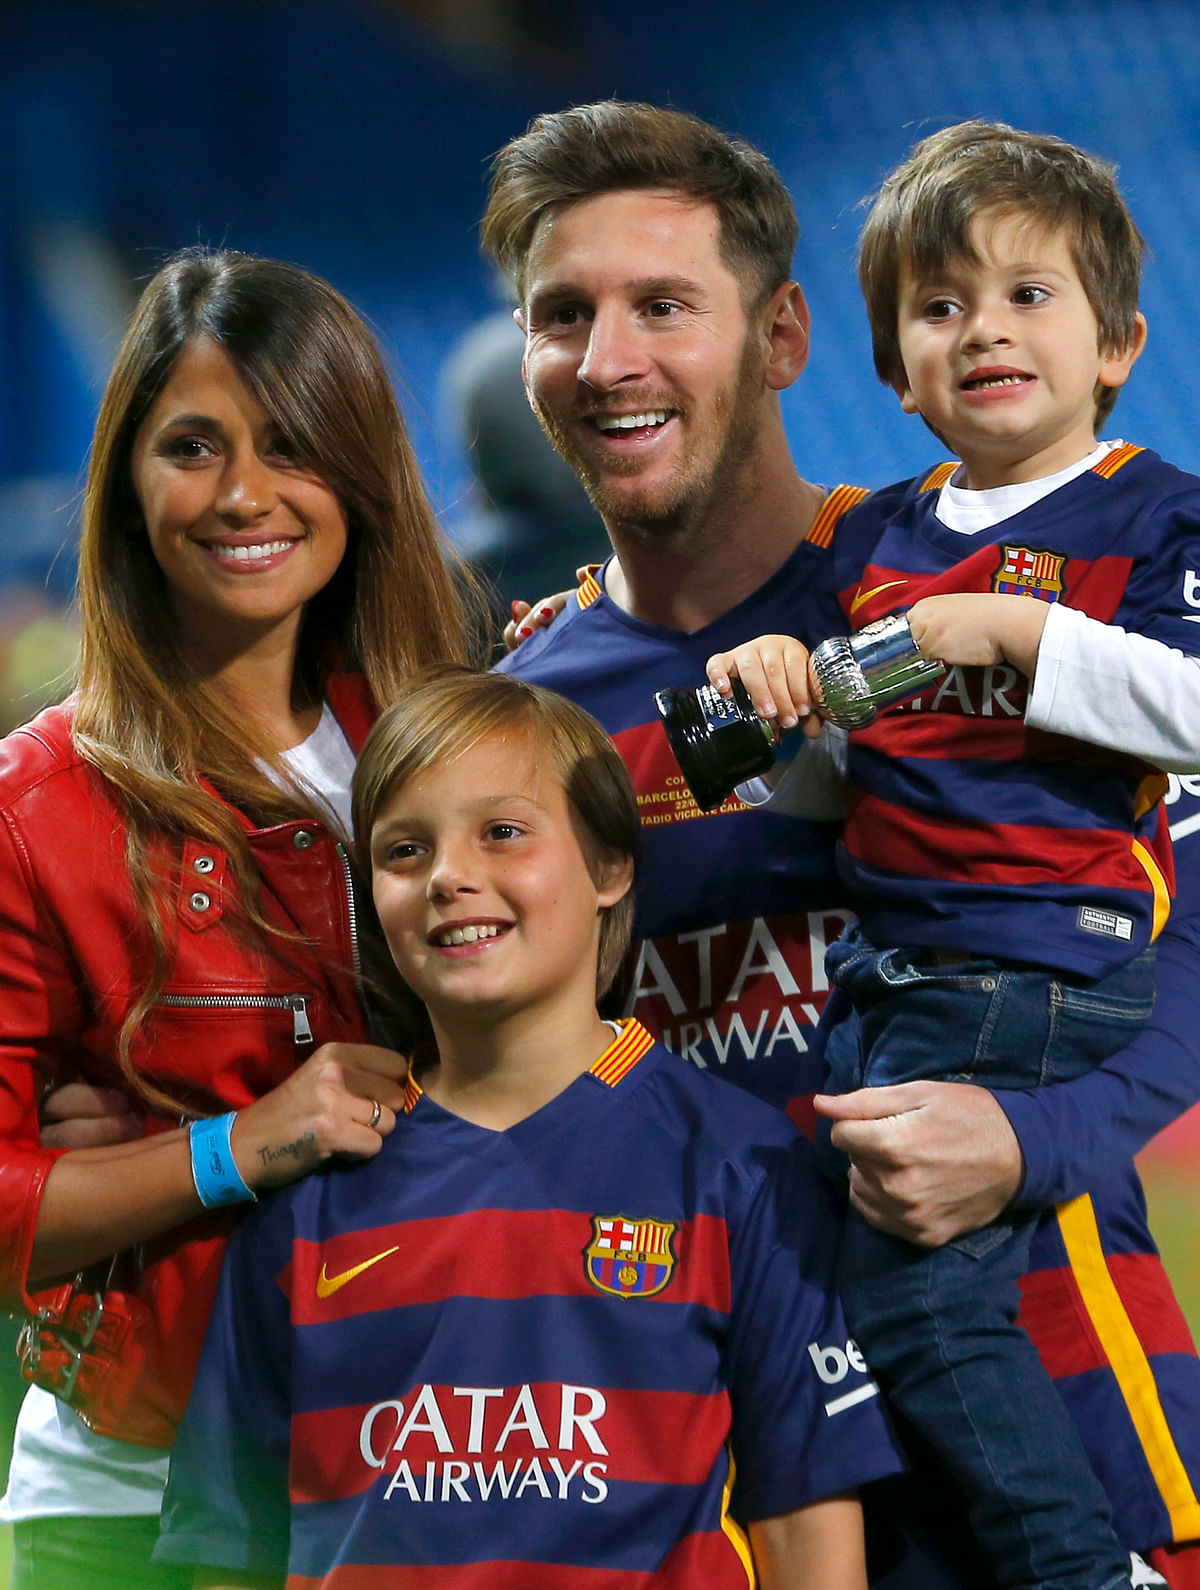 Lionel Messi will be marrying Antonella Roccuzzo, his girlfriend and mother of his two children on Friday.